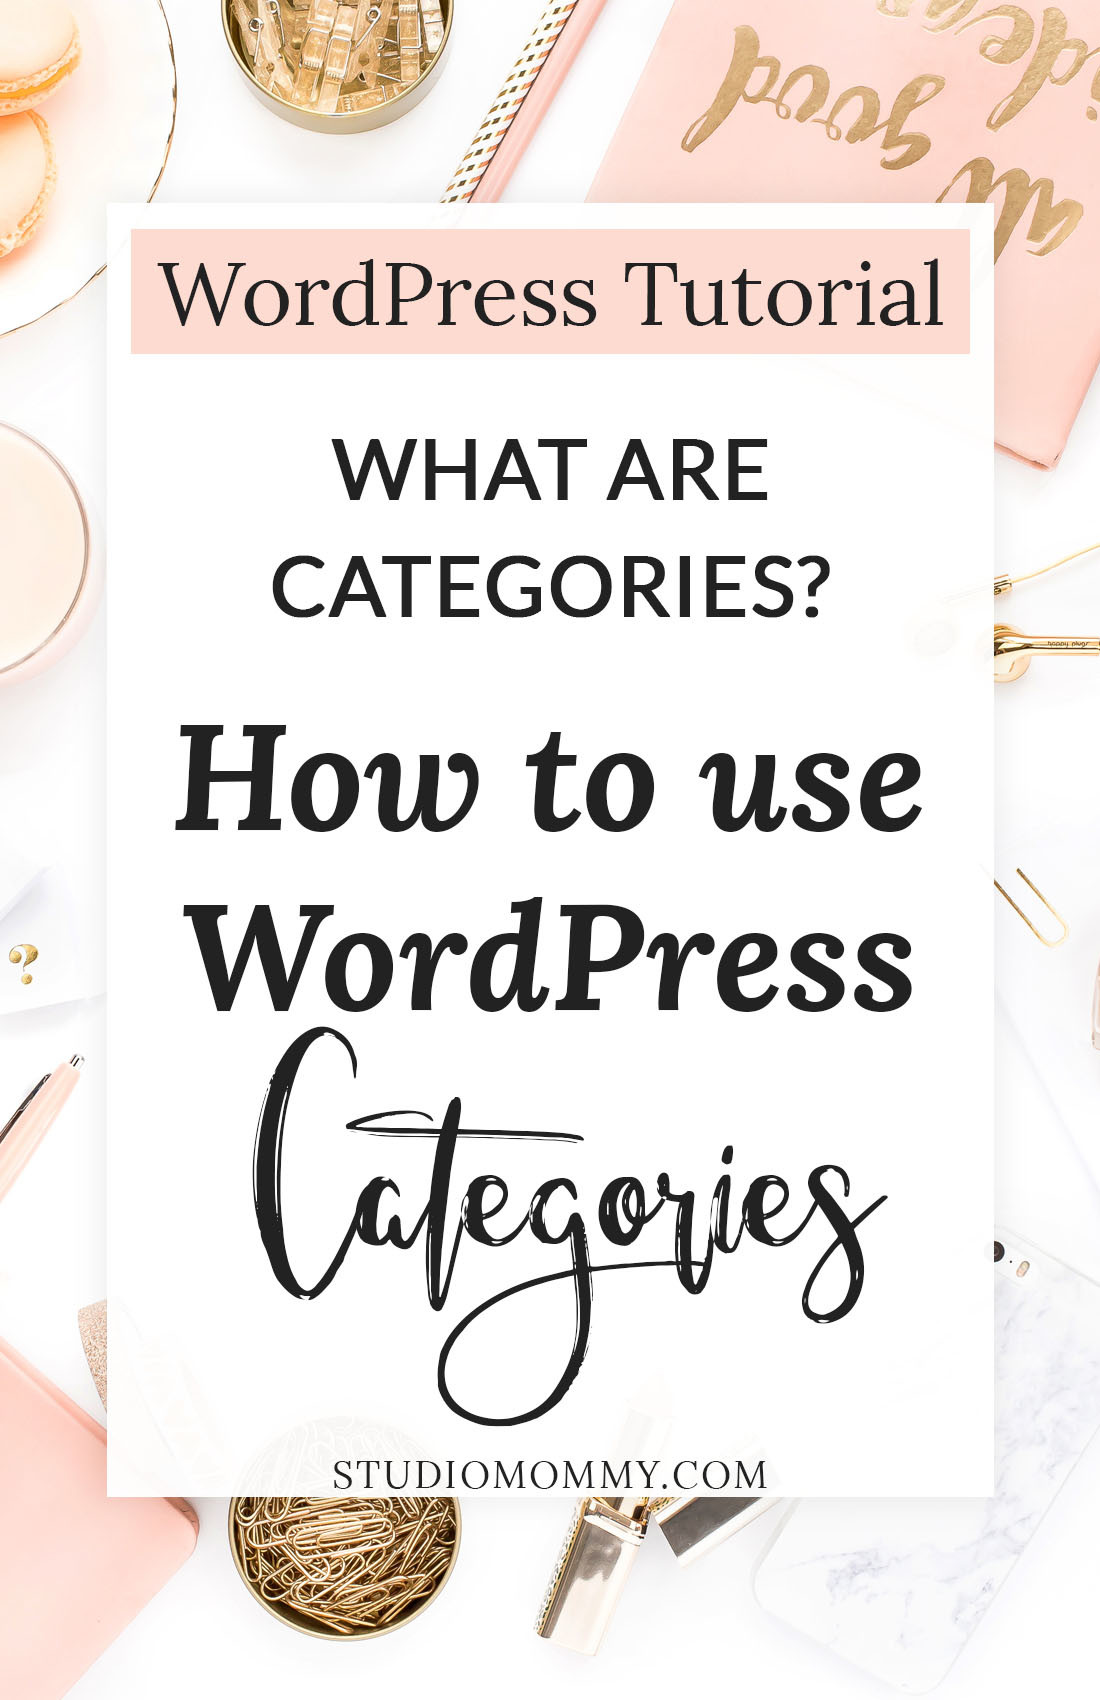 How to use WordPress Categories